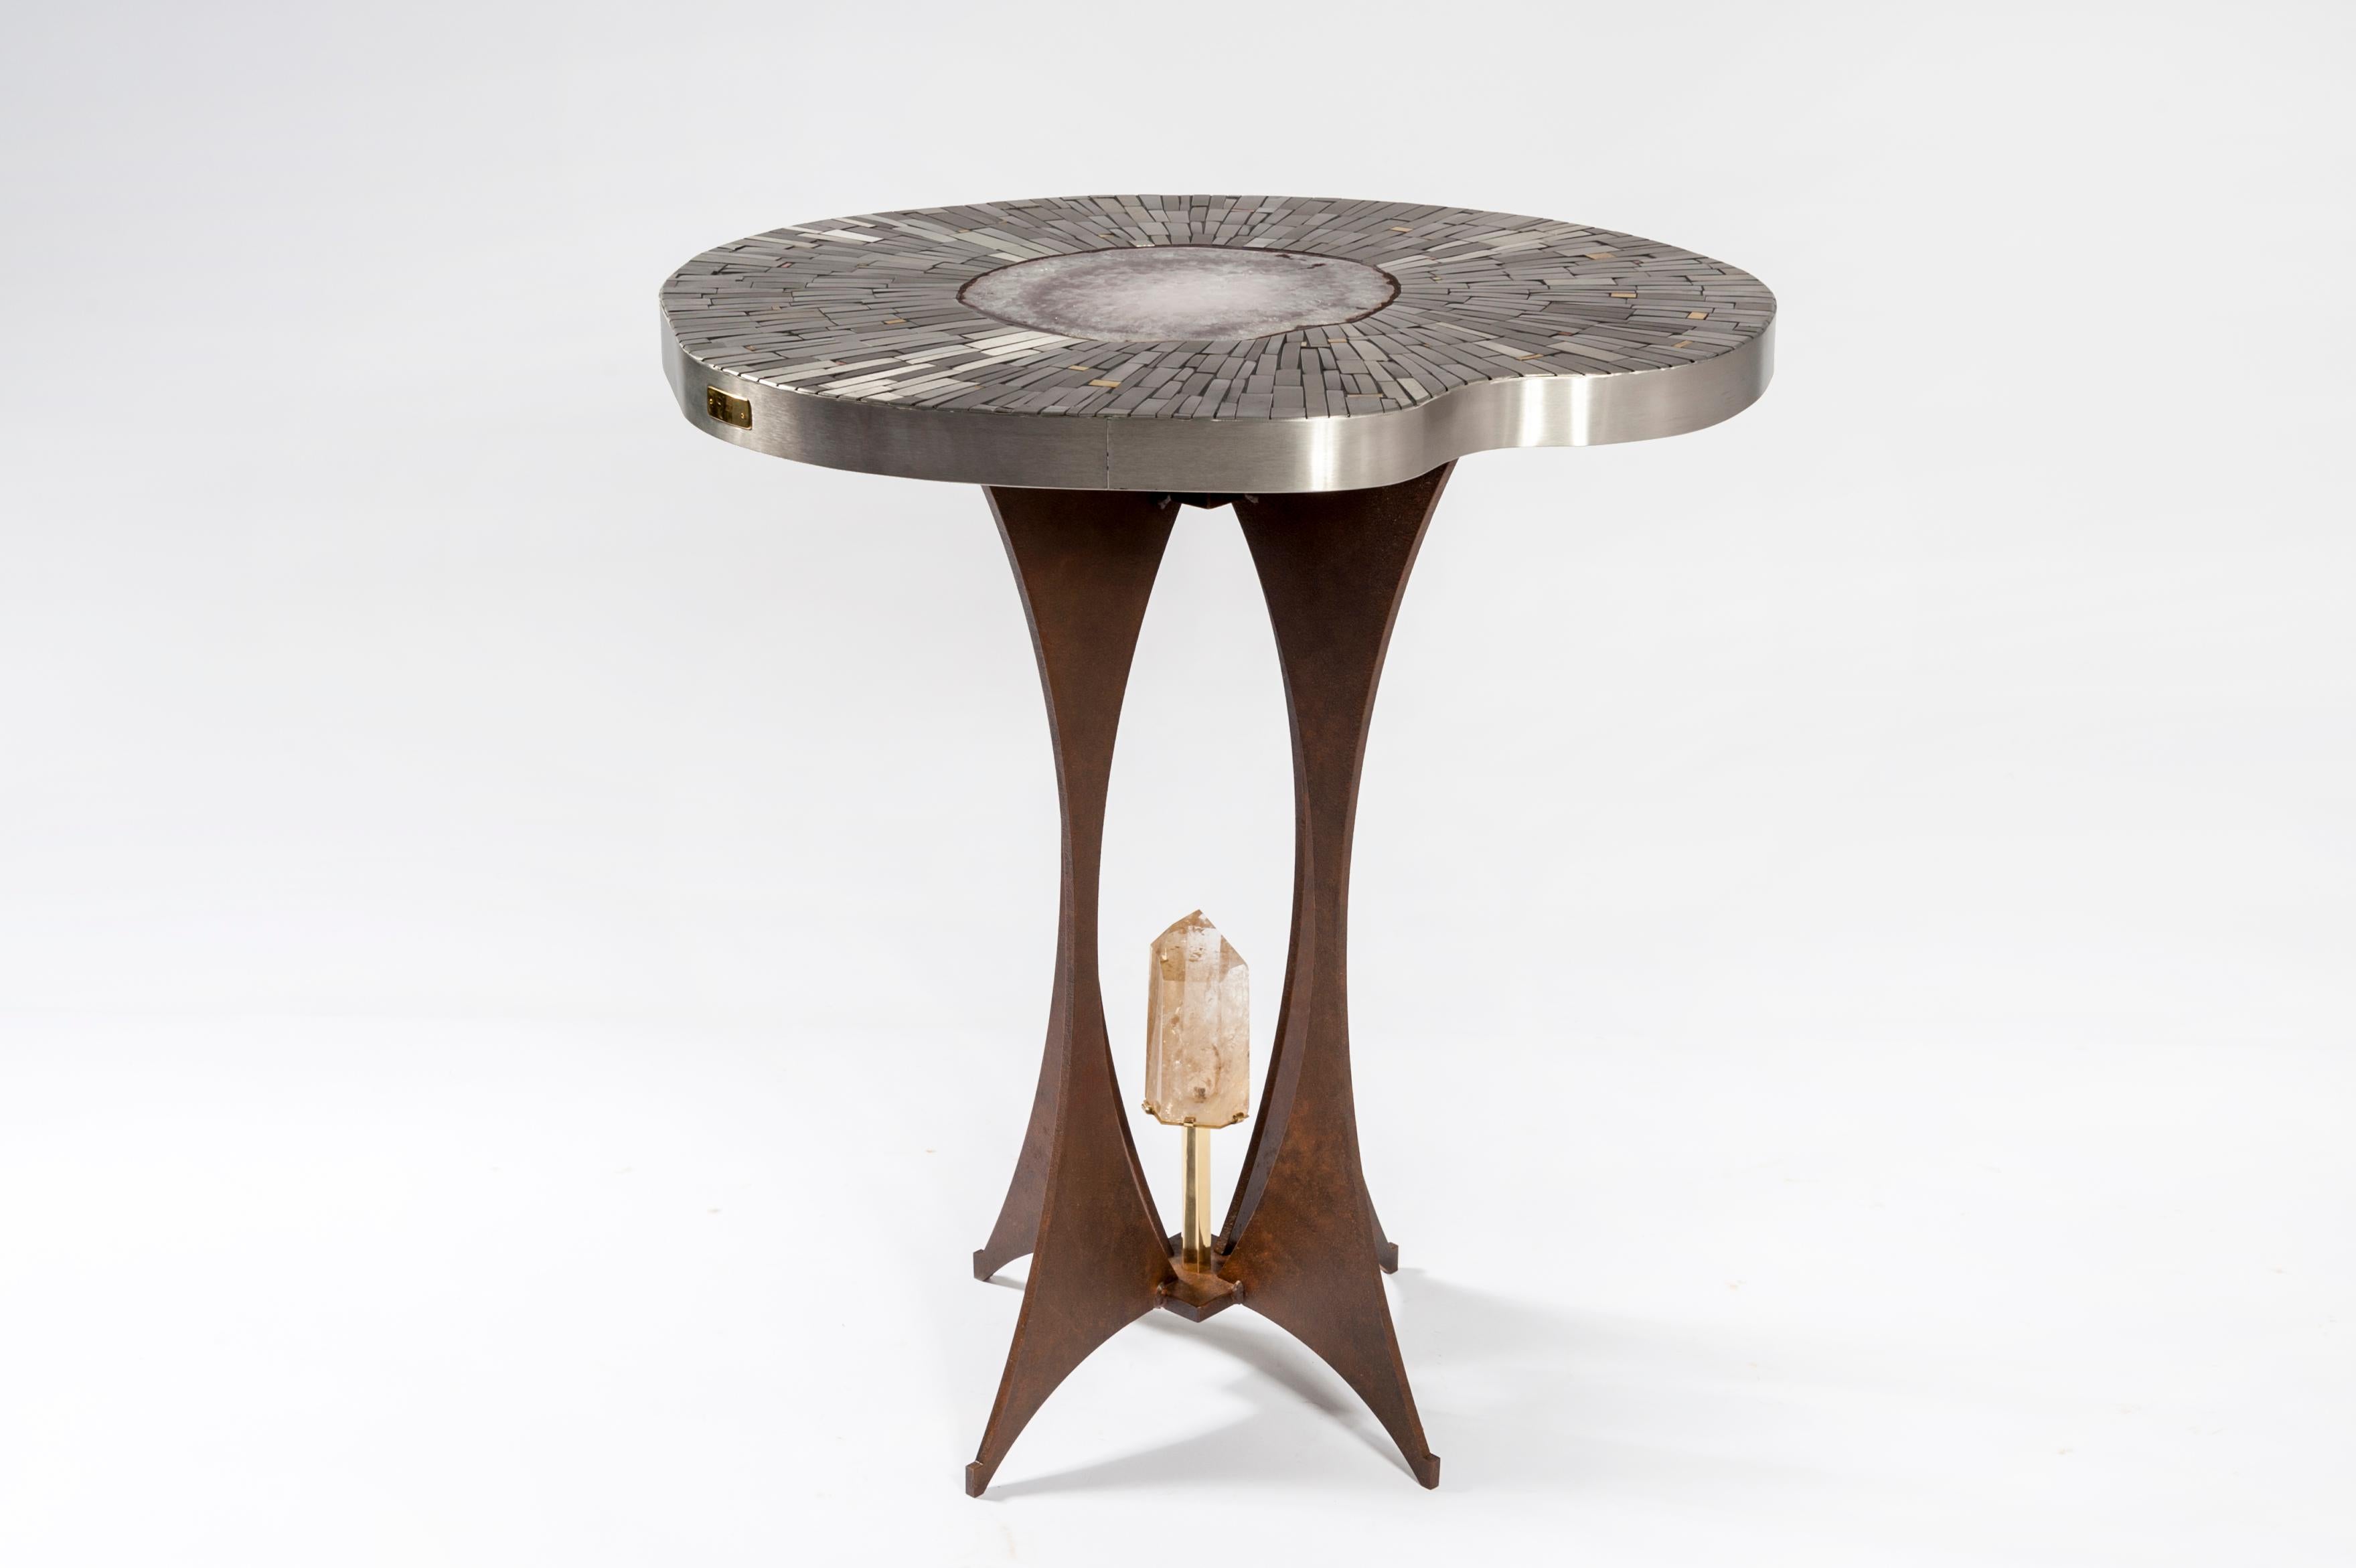 Created to measure by Stan Usel, this original pedestal table in stainless steel mosaic, inlayded with a unique agate stone and quartz stone, is designed to give your very home decoration a great sense of originality . Exceptional craftsmanship with